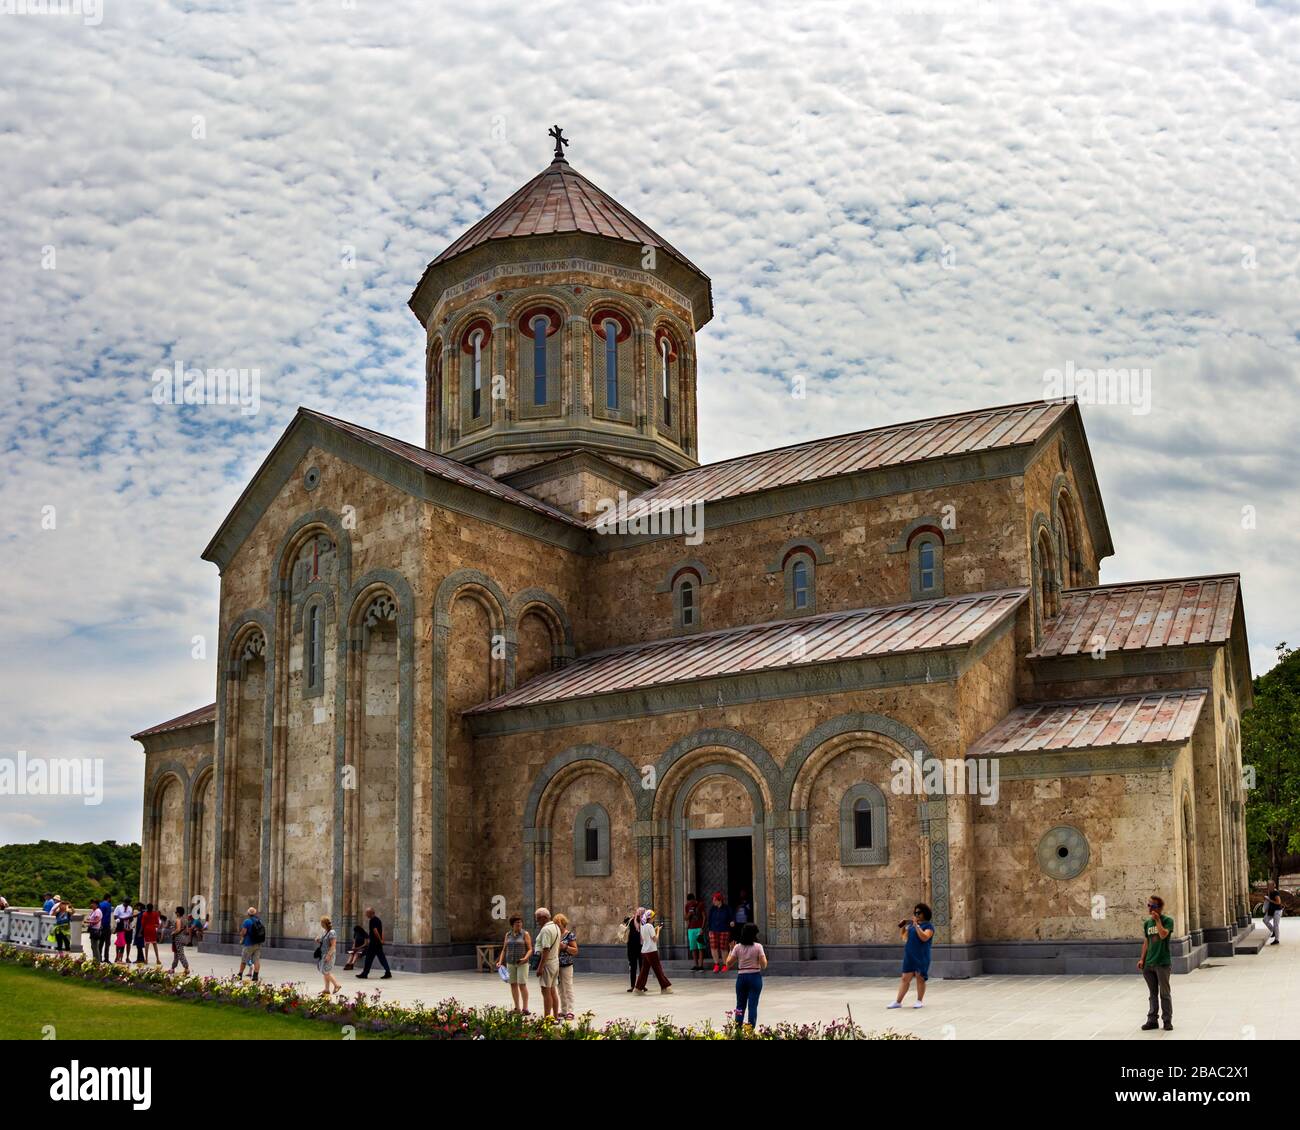 July 6, 2019 - Bodbe, Georgia - The Monastery of St. Nino at Bodbe is a Georgian Orthodox church and other sacred buildings near Sighnaghi, Kakheti, G Stock Photo